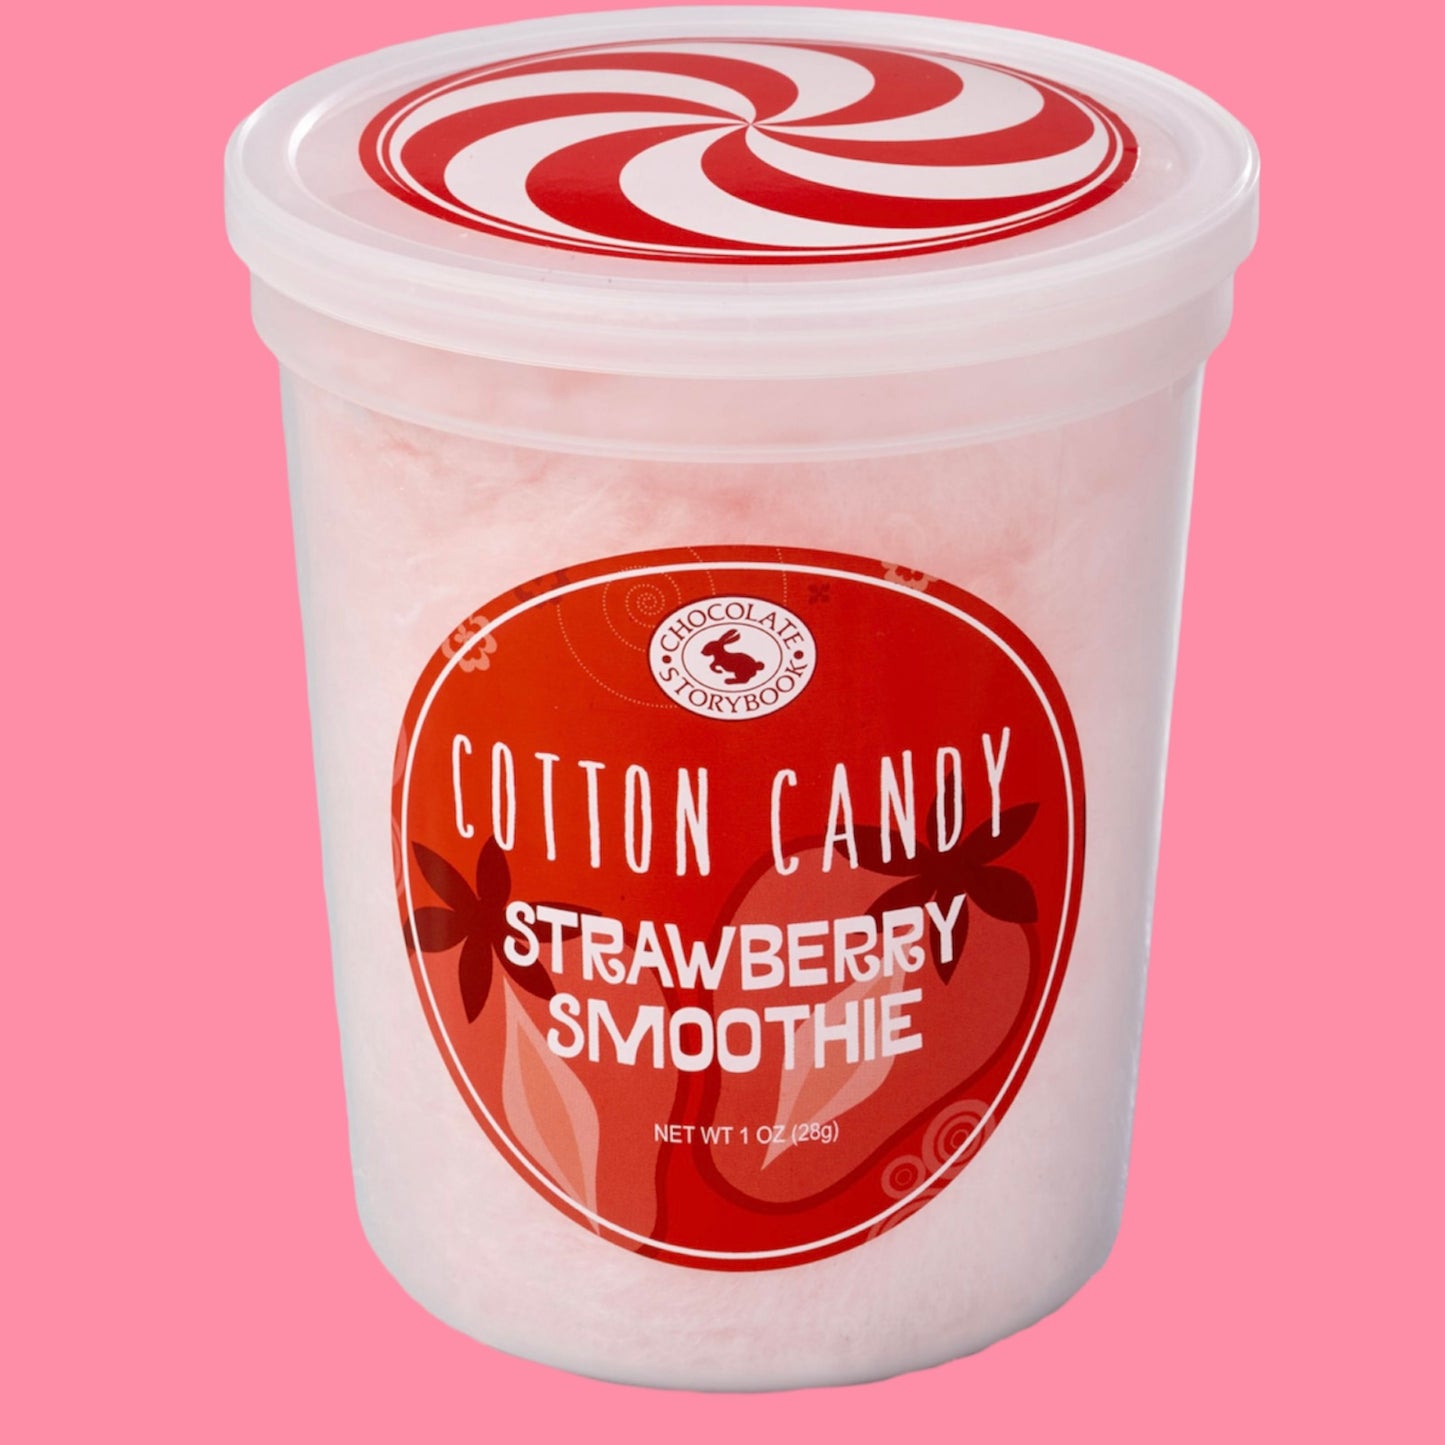 Strawberry Smoothie Cotton Candy